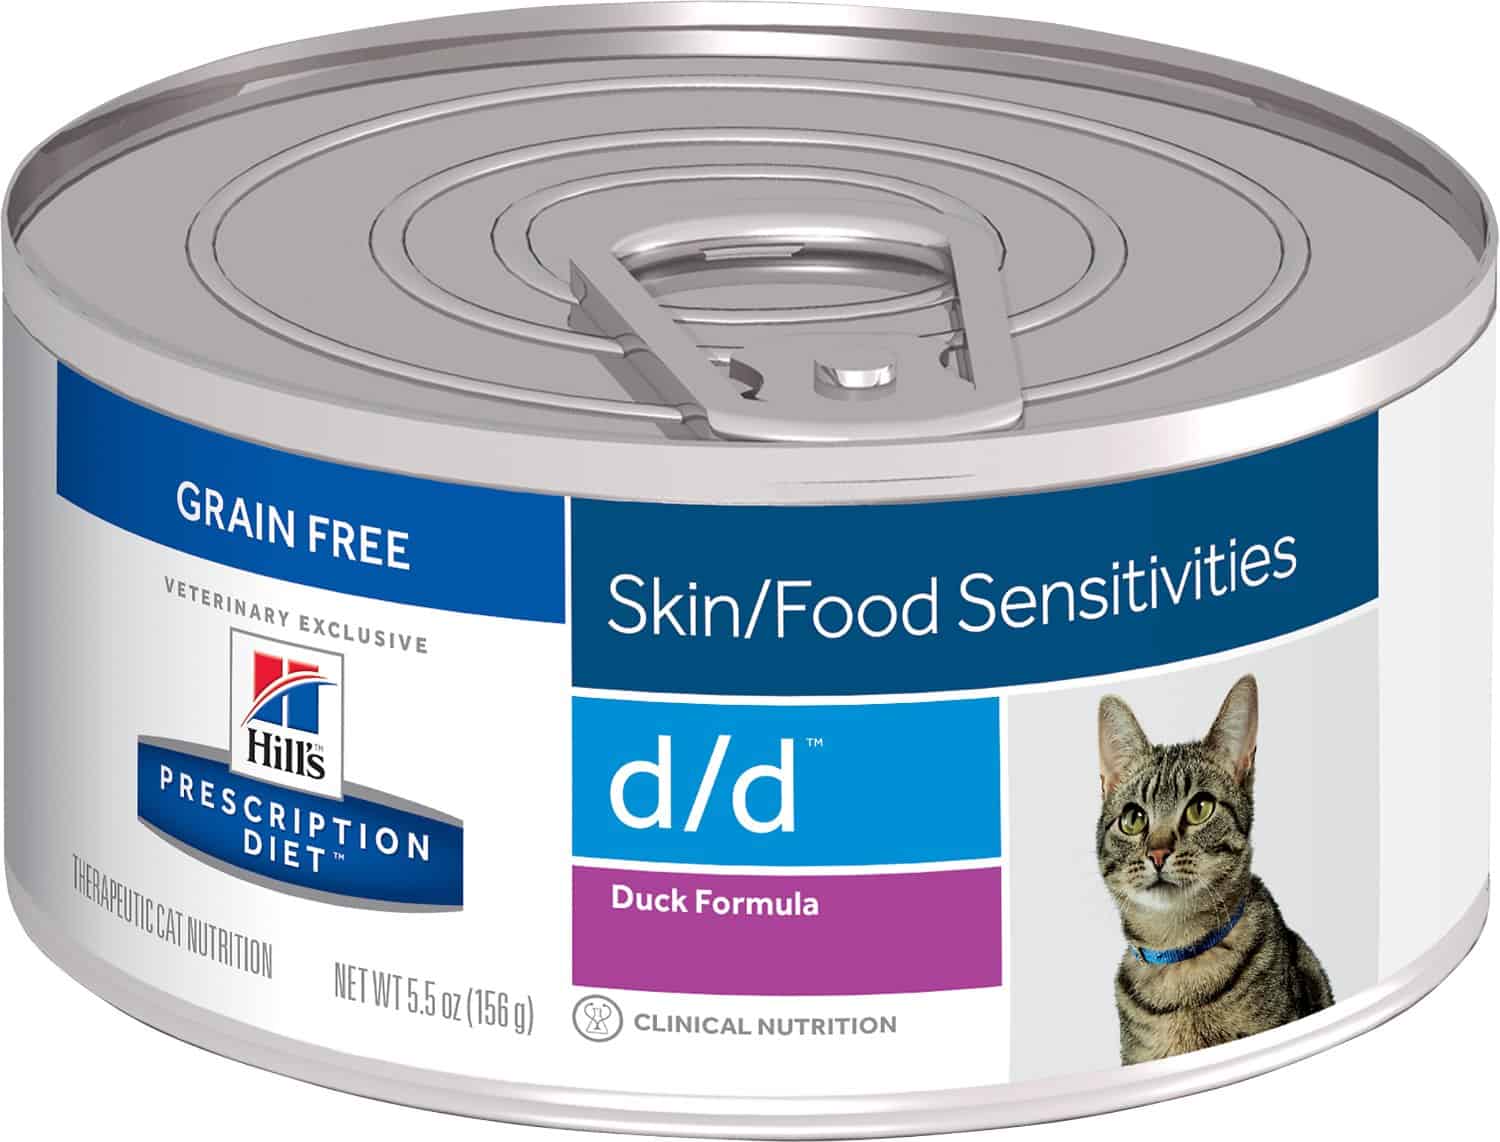 Best 10 Canned and Dry Cat Foods for IBS and IBD (2021)